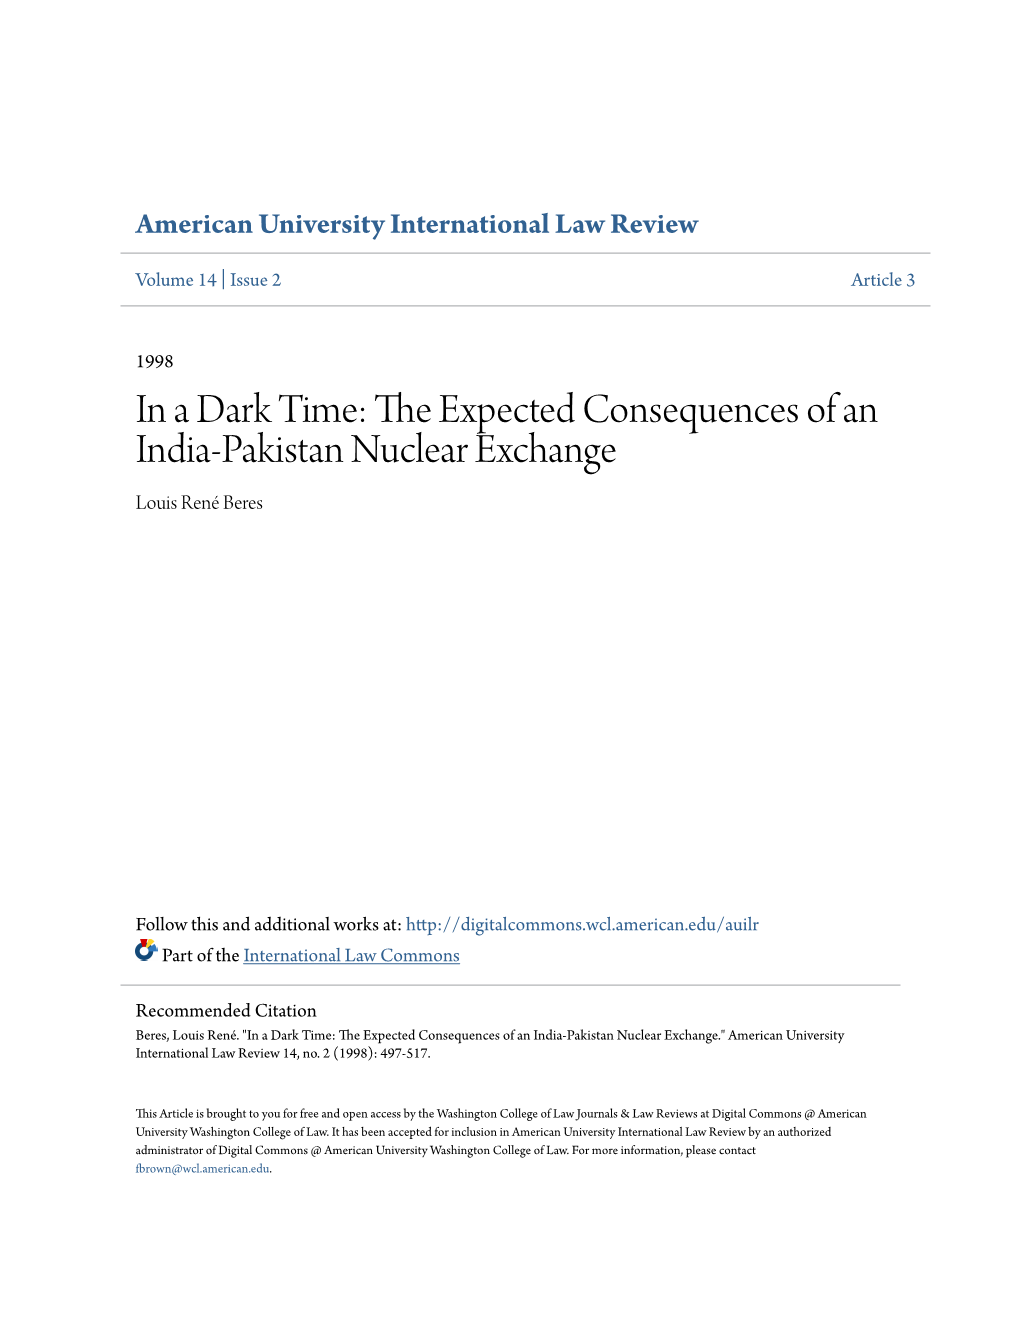 The Expected Consequences of an India-Pakistan Nuclear Exchange Louis René Beres